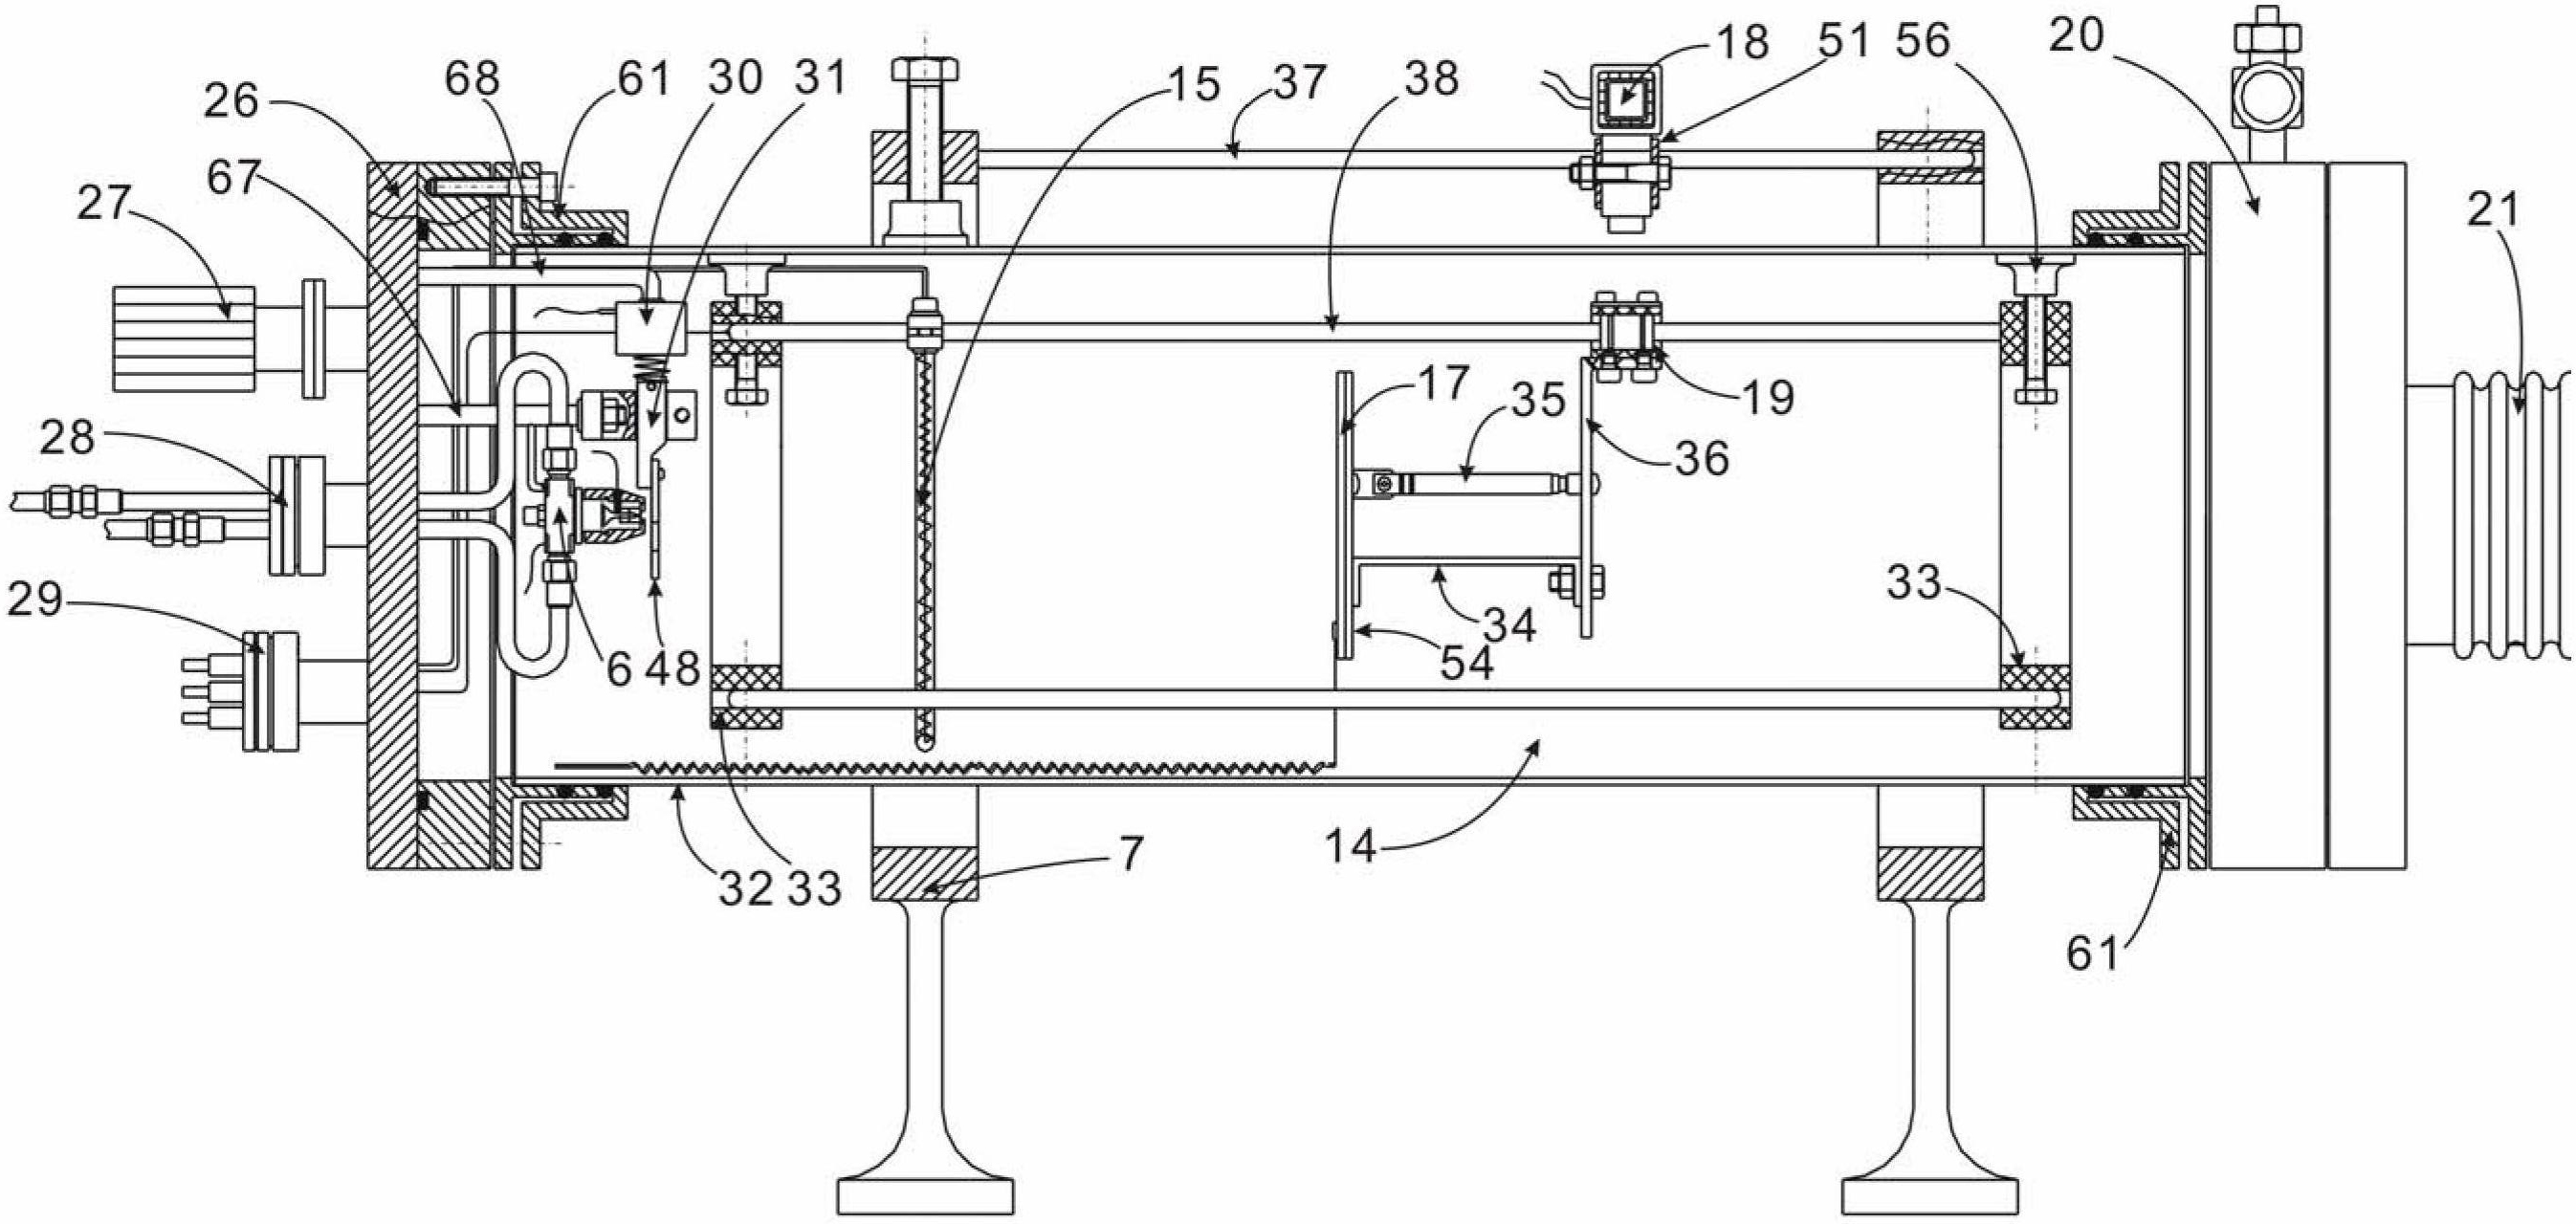 Coating device for researching vacuum spraying characteristics